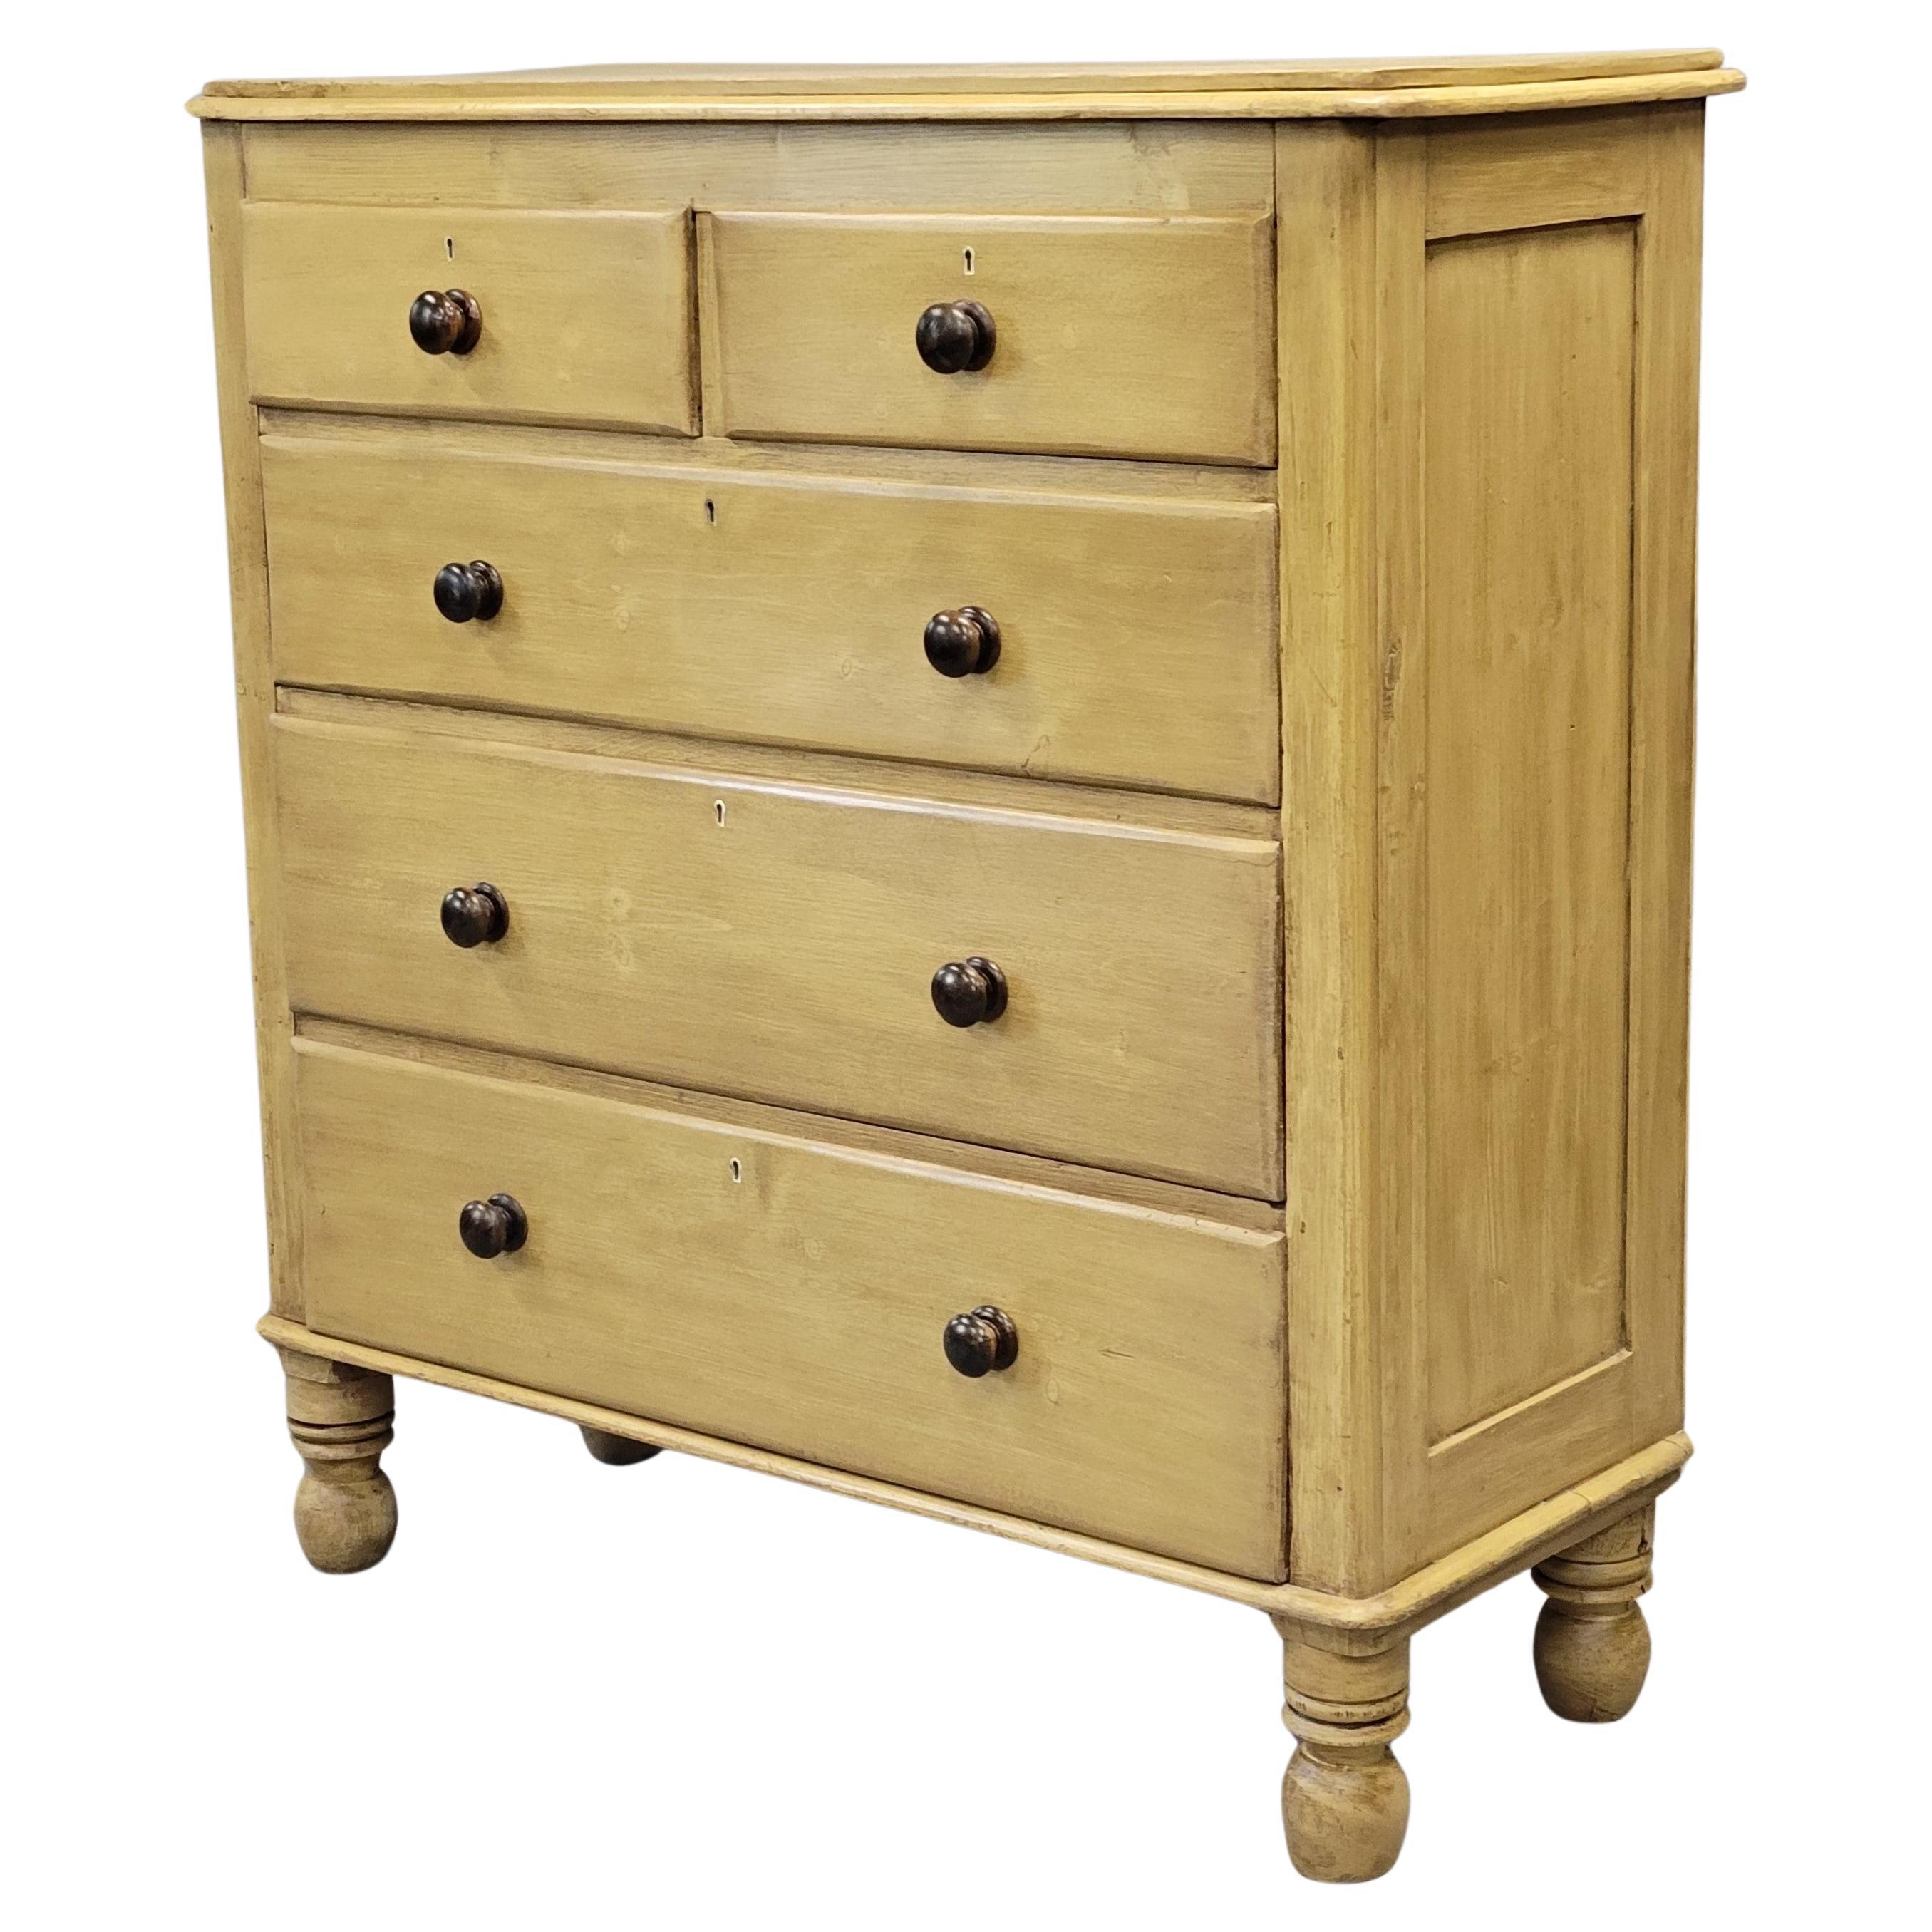 Antique English Edwardian Circa 1900 Painted Pine Dresser Chest of Drawers For Sale